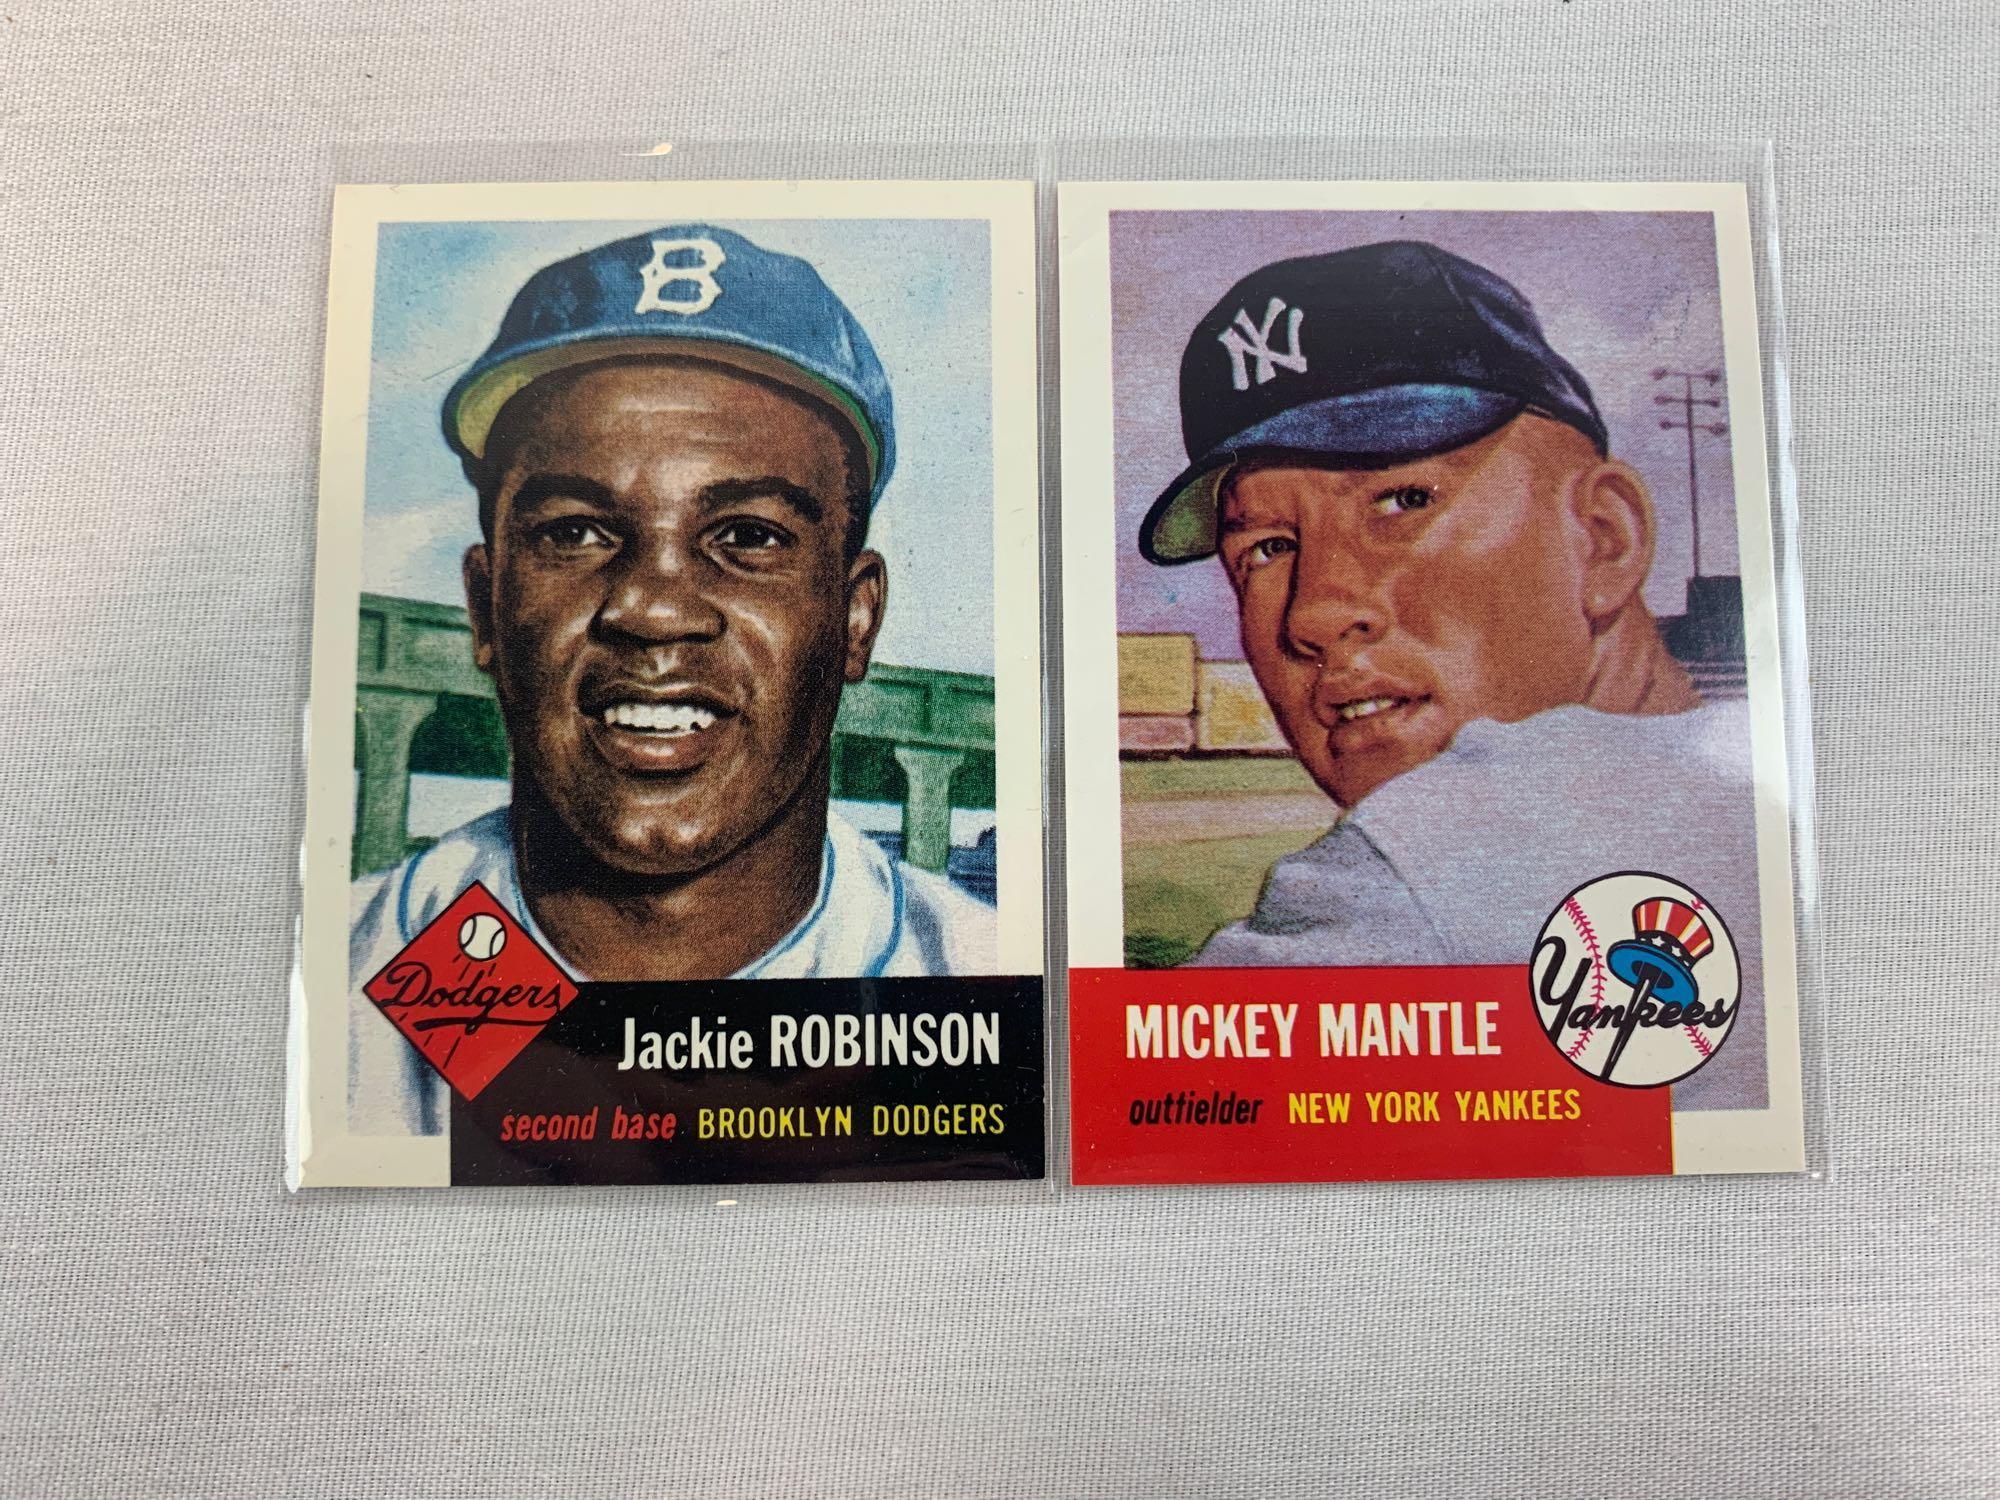 1953 Topps Archive set with Mantle and Robinson